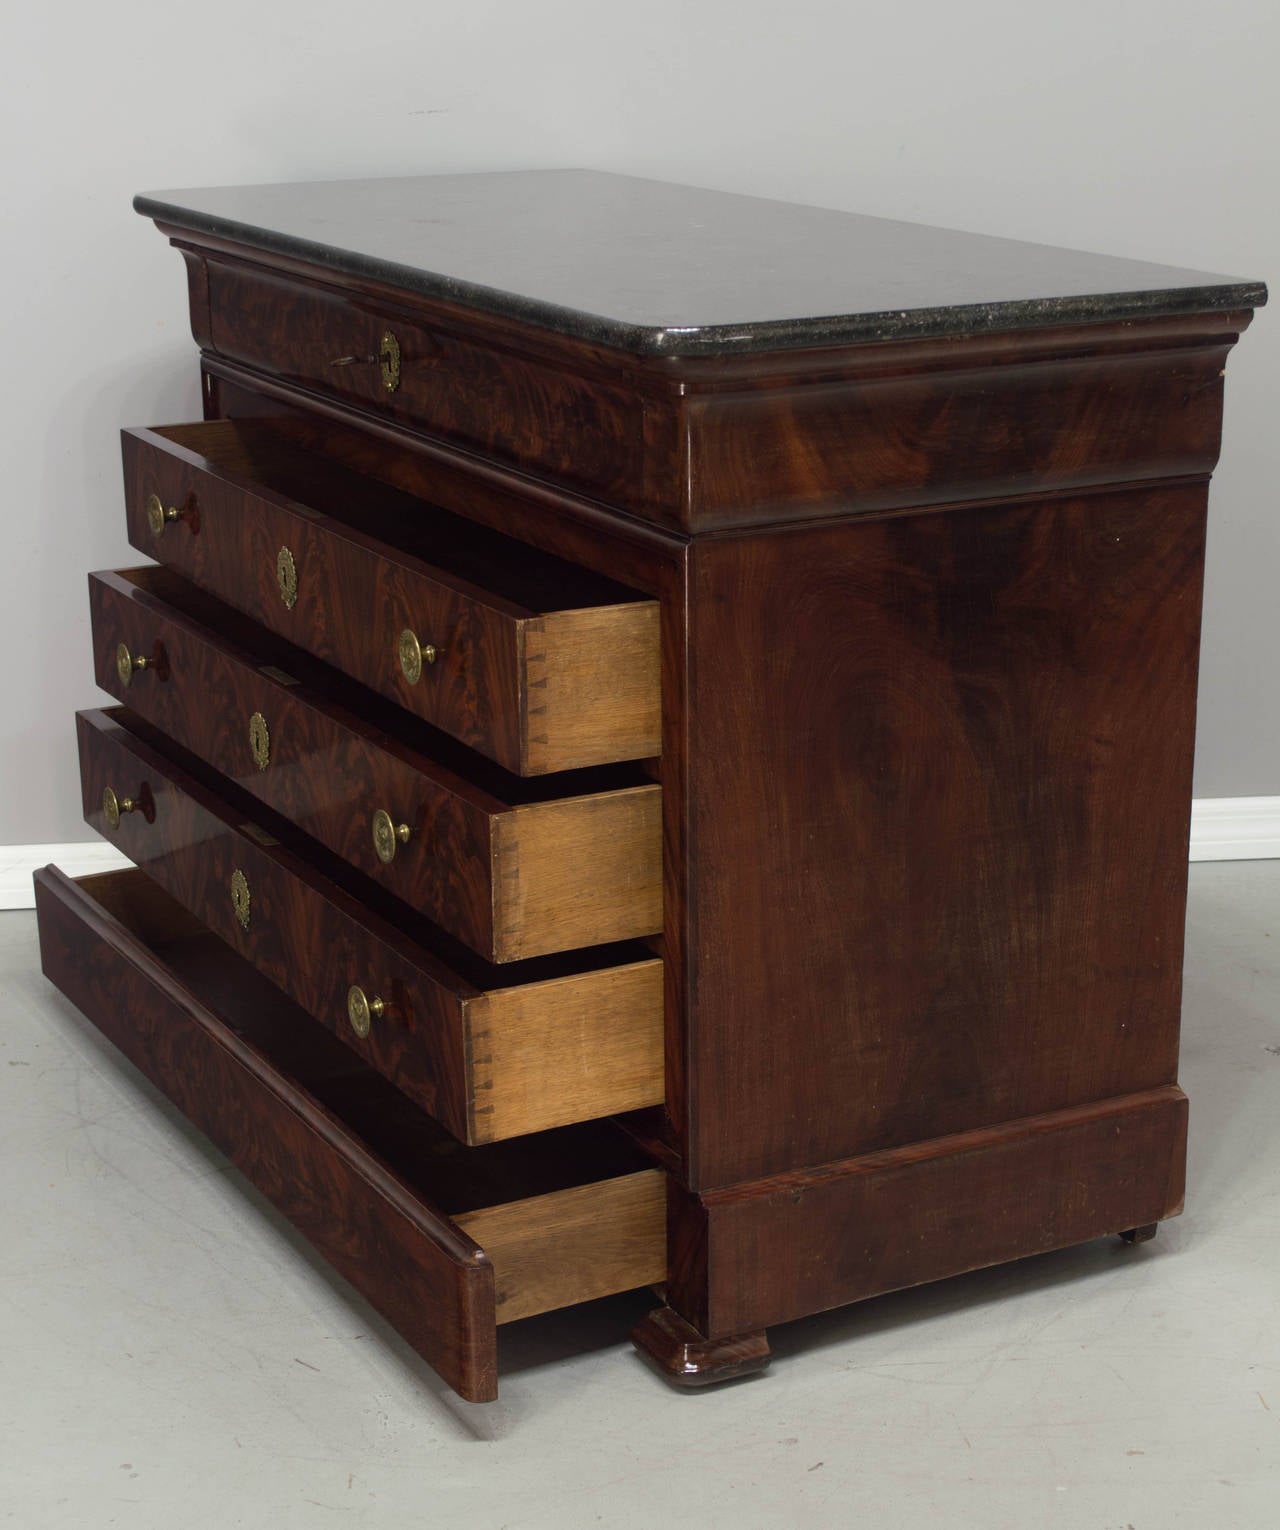 19th century Louis Philippe period mahogany commode having four dovetailed drawers and a top drawer that hinges down and pulls out to reveal a (newer) embossed leather writing surface. Desk with lock and key has four small dovetailed drawers with